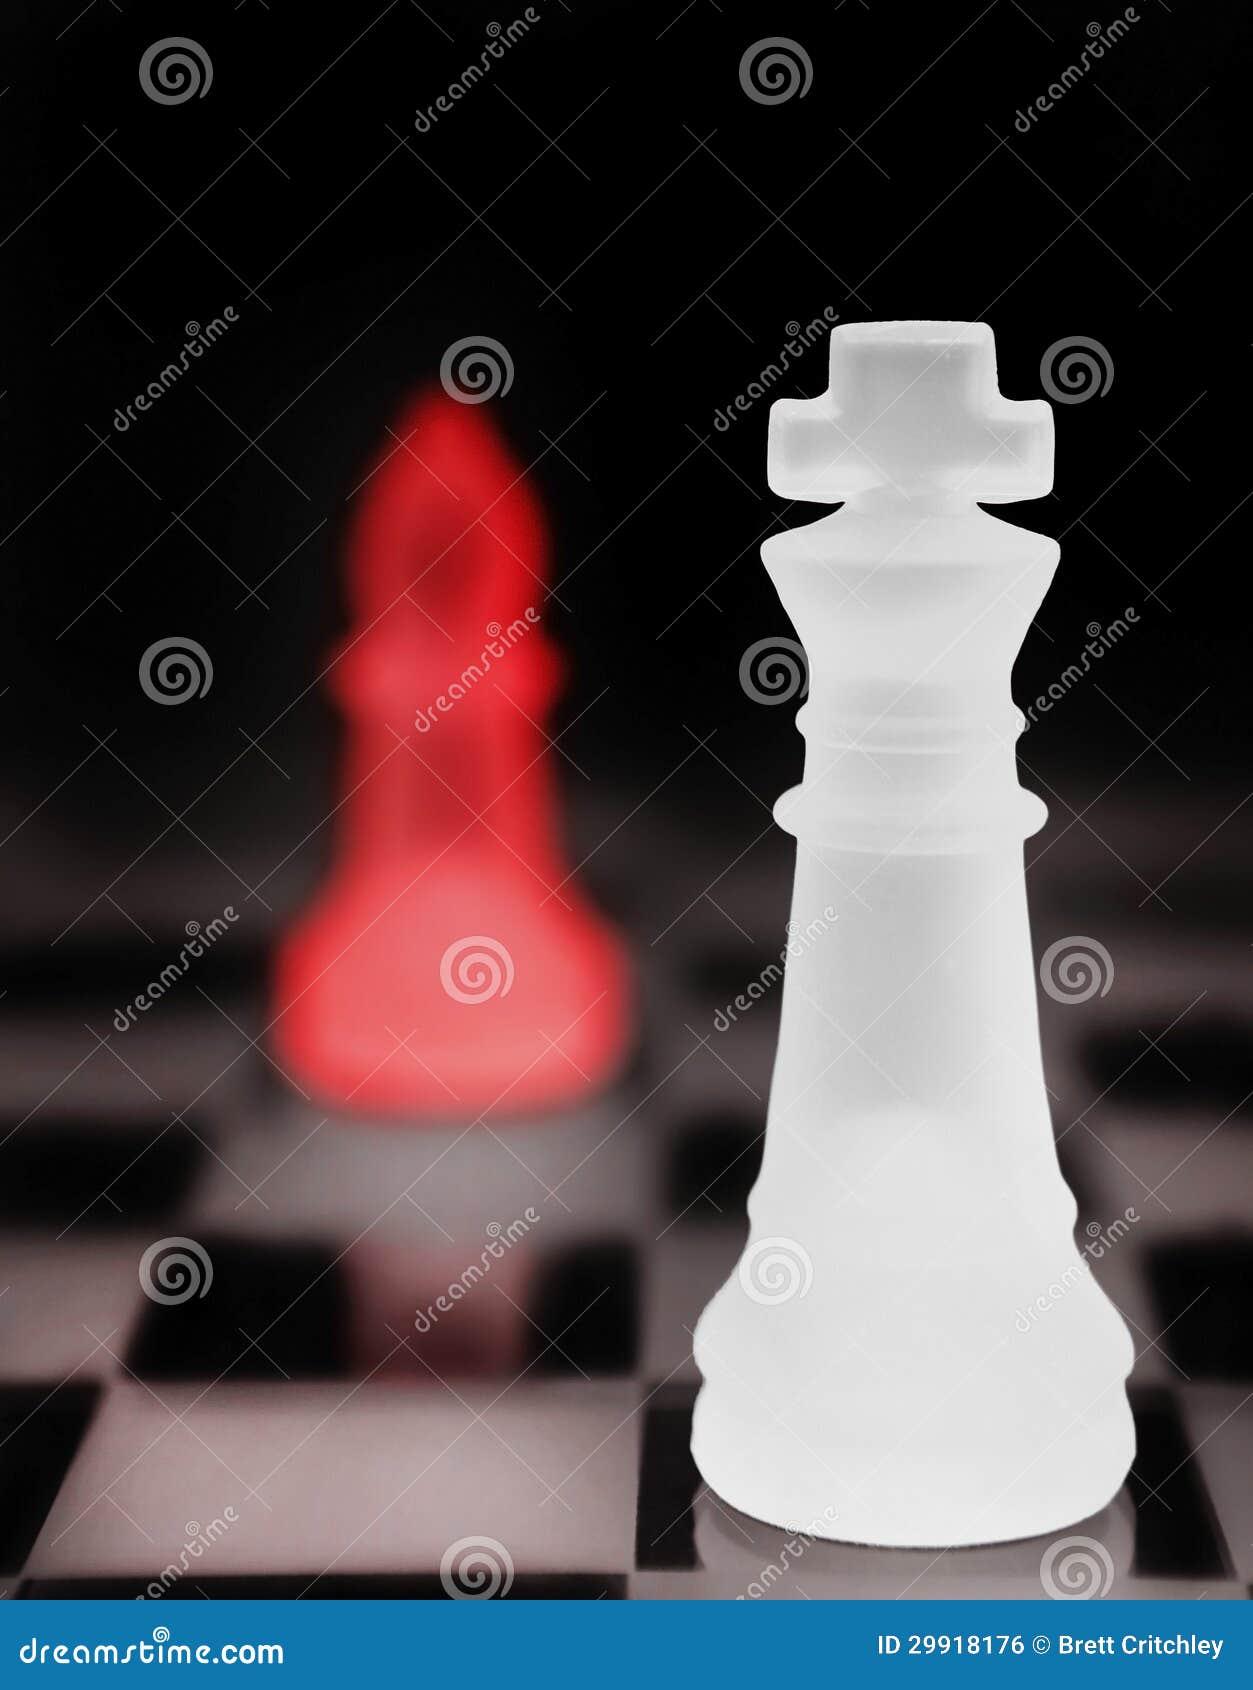 Wallpaper Chess with One Rook Stock Photo - Image of conceptual